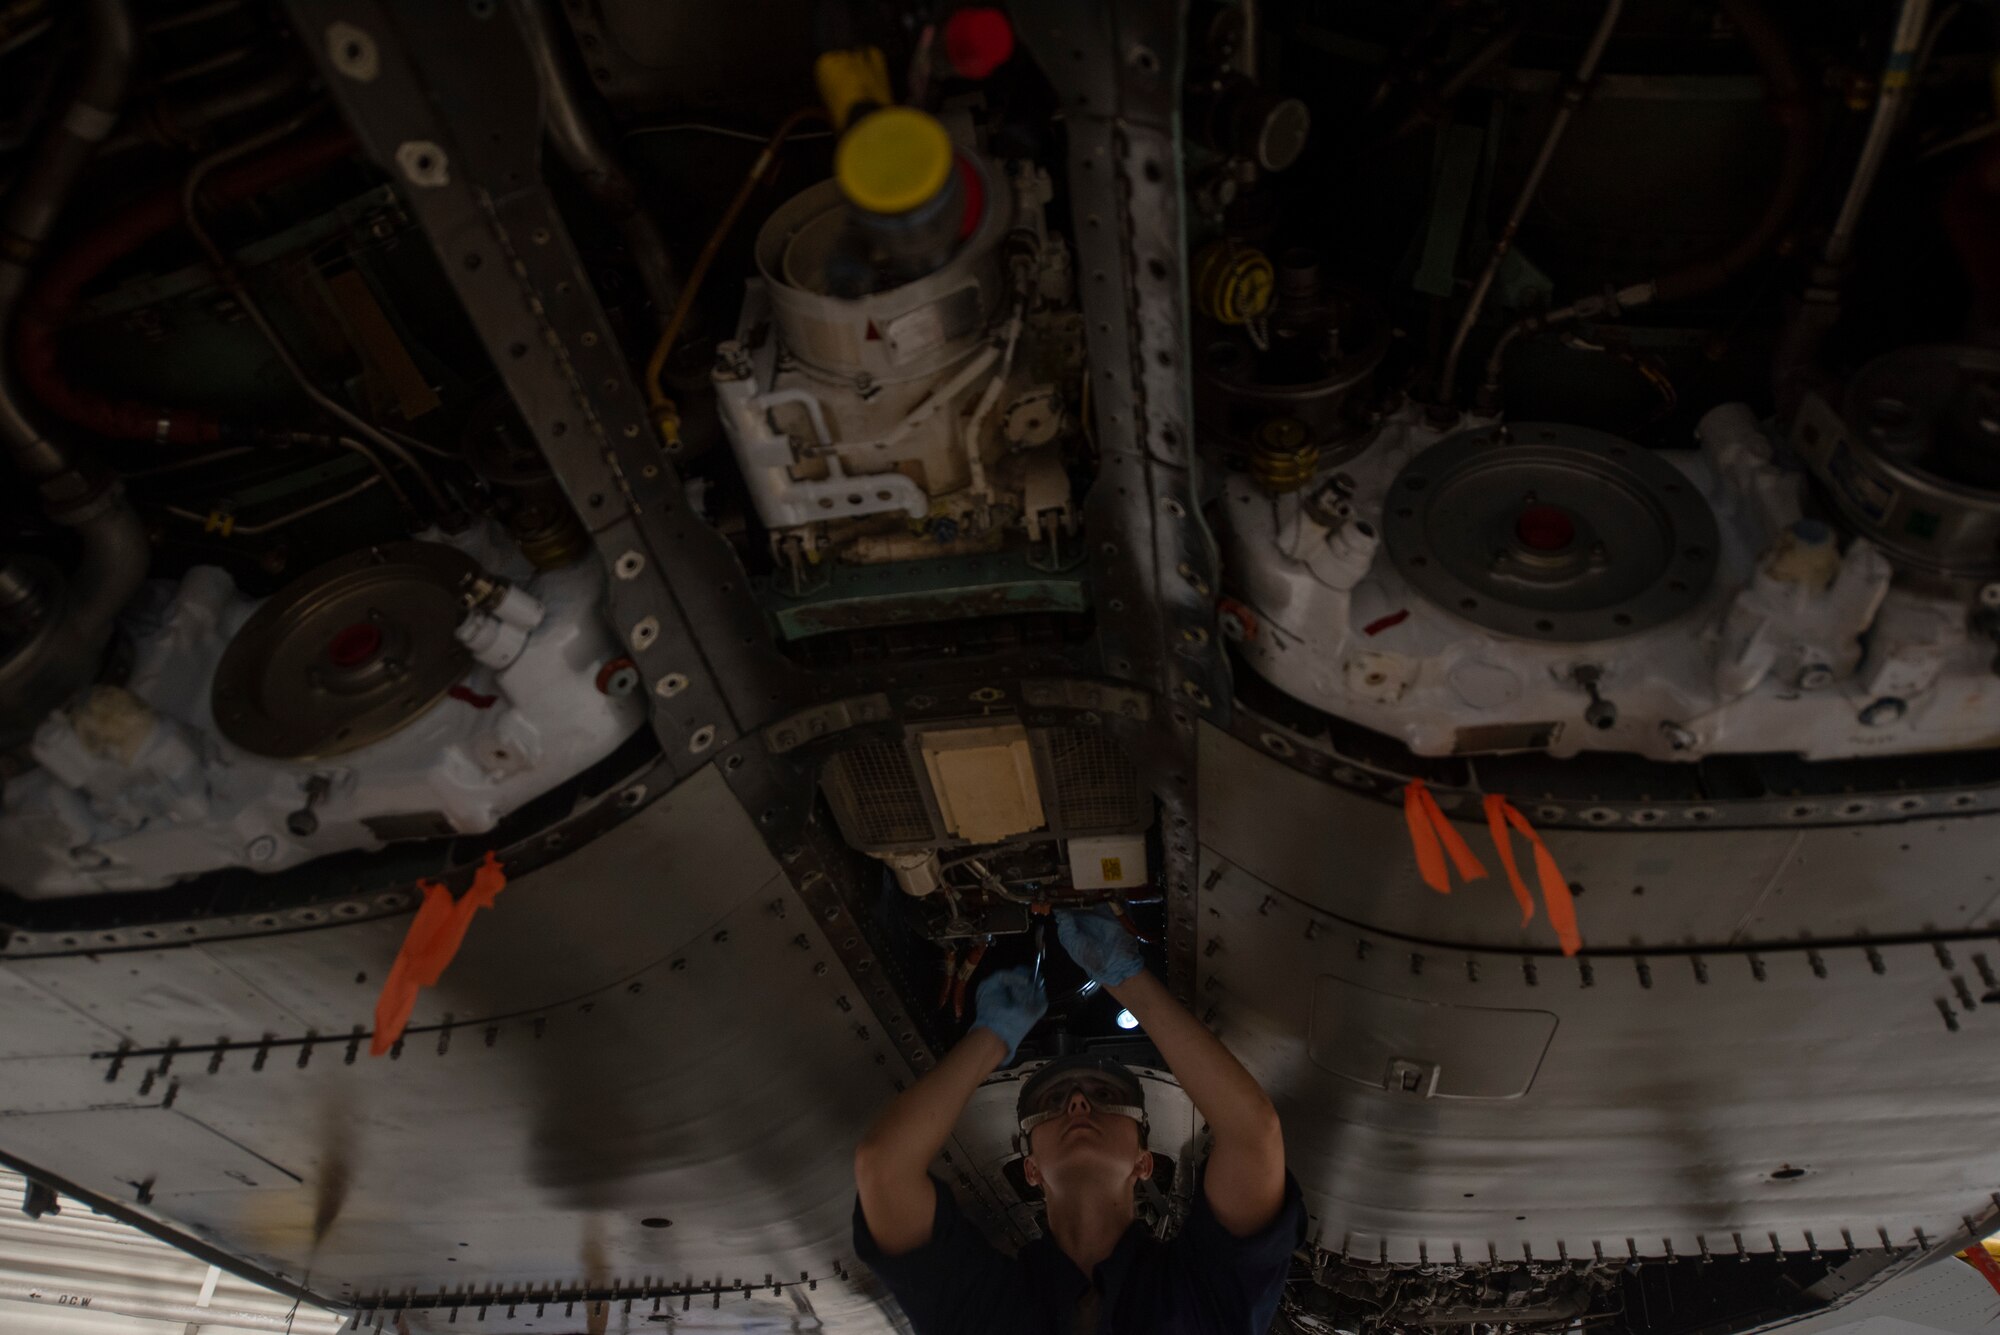 U.S. Air Force Airman Heidi Moon, 18th Equipment Maintenance Squadron phase inspector, installs a jet-fuel starter during a phase inspection at Kadena Air Base, Japan, Sept. 17, 2019.